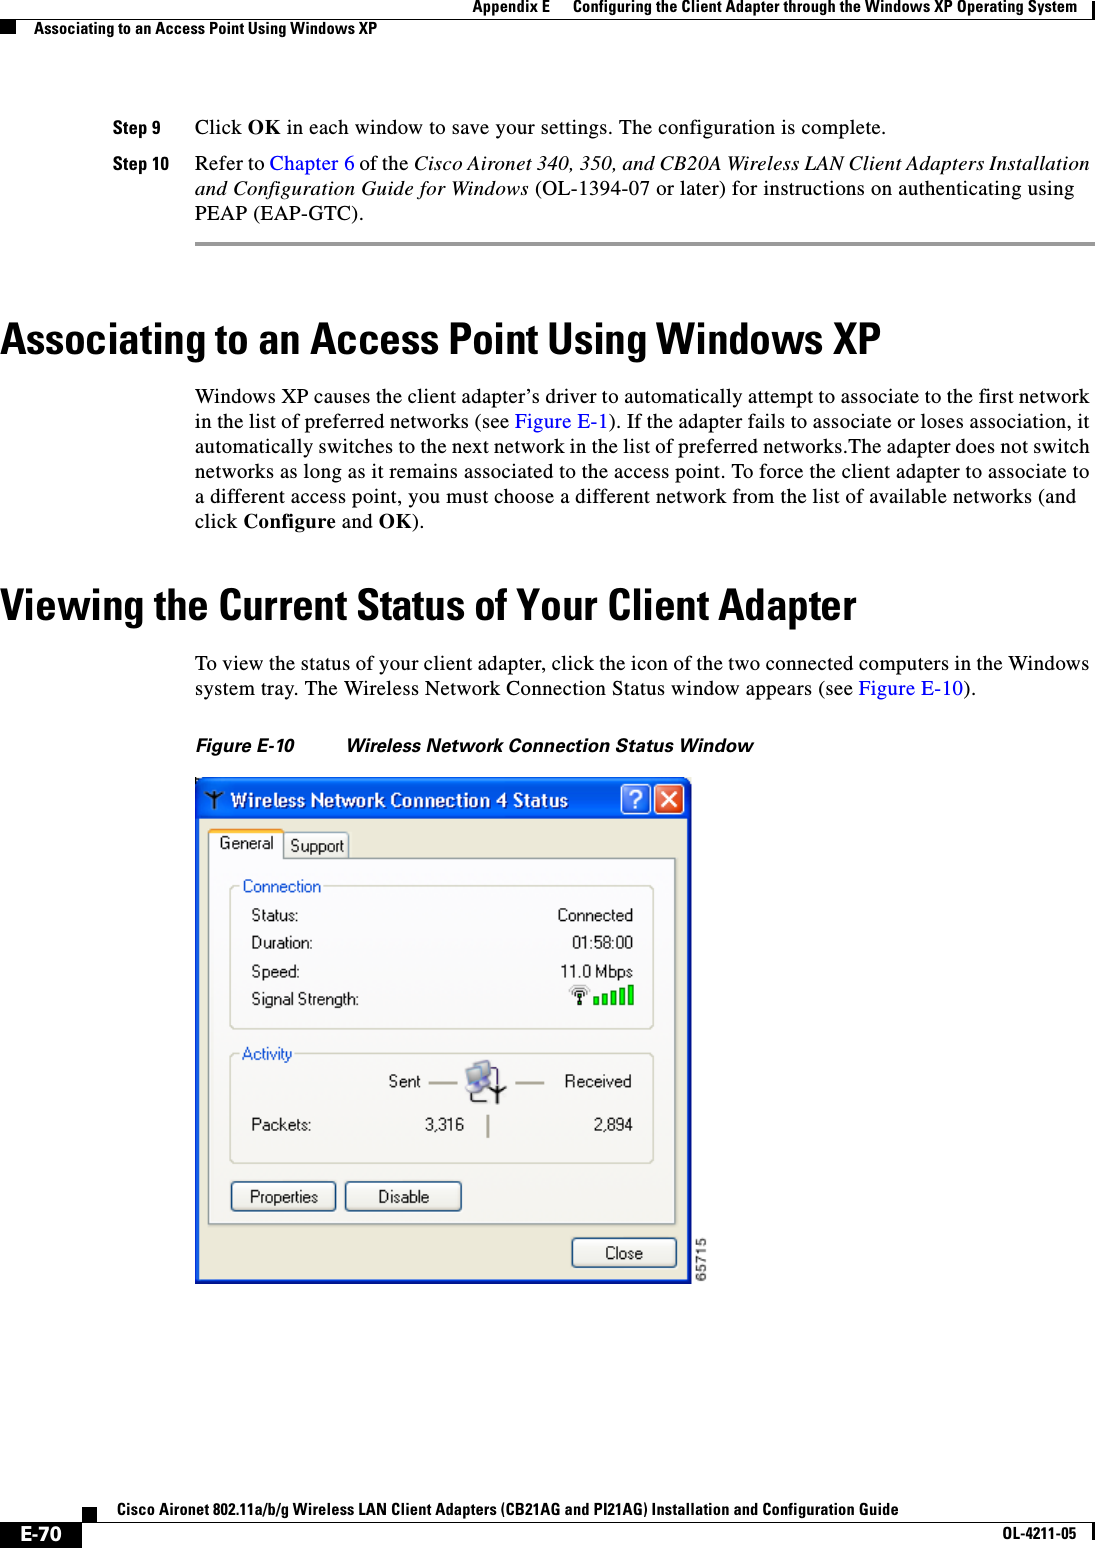 E-70Cisco Aironet 802.11a/b/g Wireless LAN Client Adapters (CB21AG and PI21AG) Installation and Configuration GuideOL-4211-05Appendix E      Configuring the Client Adapter through the Windows XP Operating SystemAssociating to an Access Point Using Windows XPStep 9 Click OK in each window to save your settings. The configuration is complete.Step 10 Refer to Chapter 6 of the Cisco Aironet 340, 350, and CB20A Wireless LAN Client Adapters Installation and Configuration Guide for Windows (OL-1394-07 or later) for instructions on authenticating using PEAP (EAP-GTC).Associating to an Access Point Using Windows XPWindows XP causes the client adapter’s driver to automatically attempt to associate to the first network in the list of preferred networks (see Figure E-1). If the adapter fails to associate or loses association, it automatically switches to the next network in the list of preferred networks.The adapter does not switch networks as long as it remains associated to the access point. To force the client adapter to associate to a different access point, you must choose a different network from the list of available networks (and click Configure and OK).Viewing the Current Status of Your Client AdapterTo view the status of your client adapter, click the icon of the two connected computers in the Windows system tray. The Wireless Network Connection Status window appears (see Figure E-10).Figure E-10 Wireless Network Connection Status Window